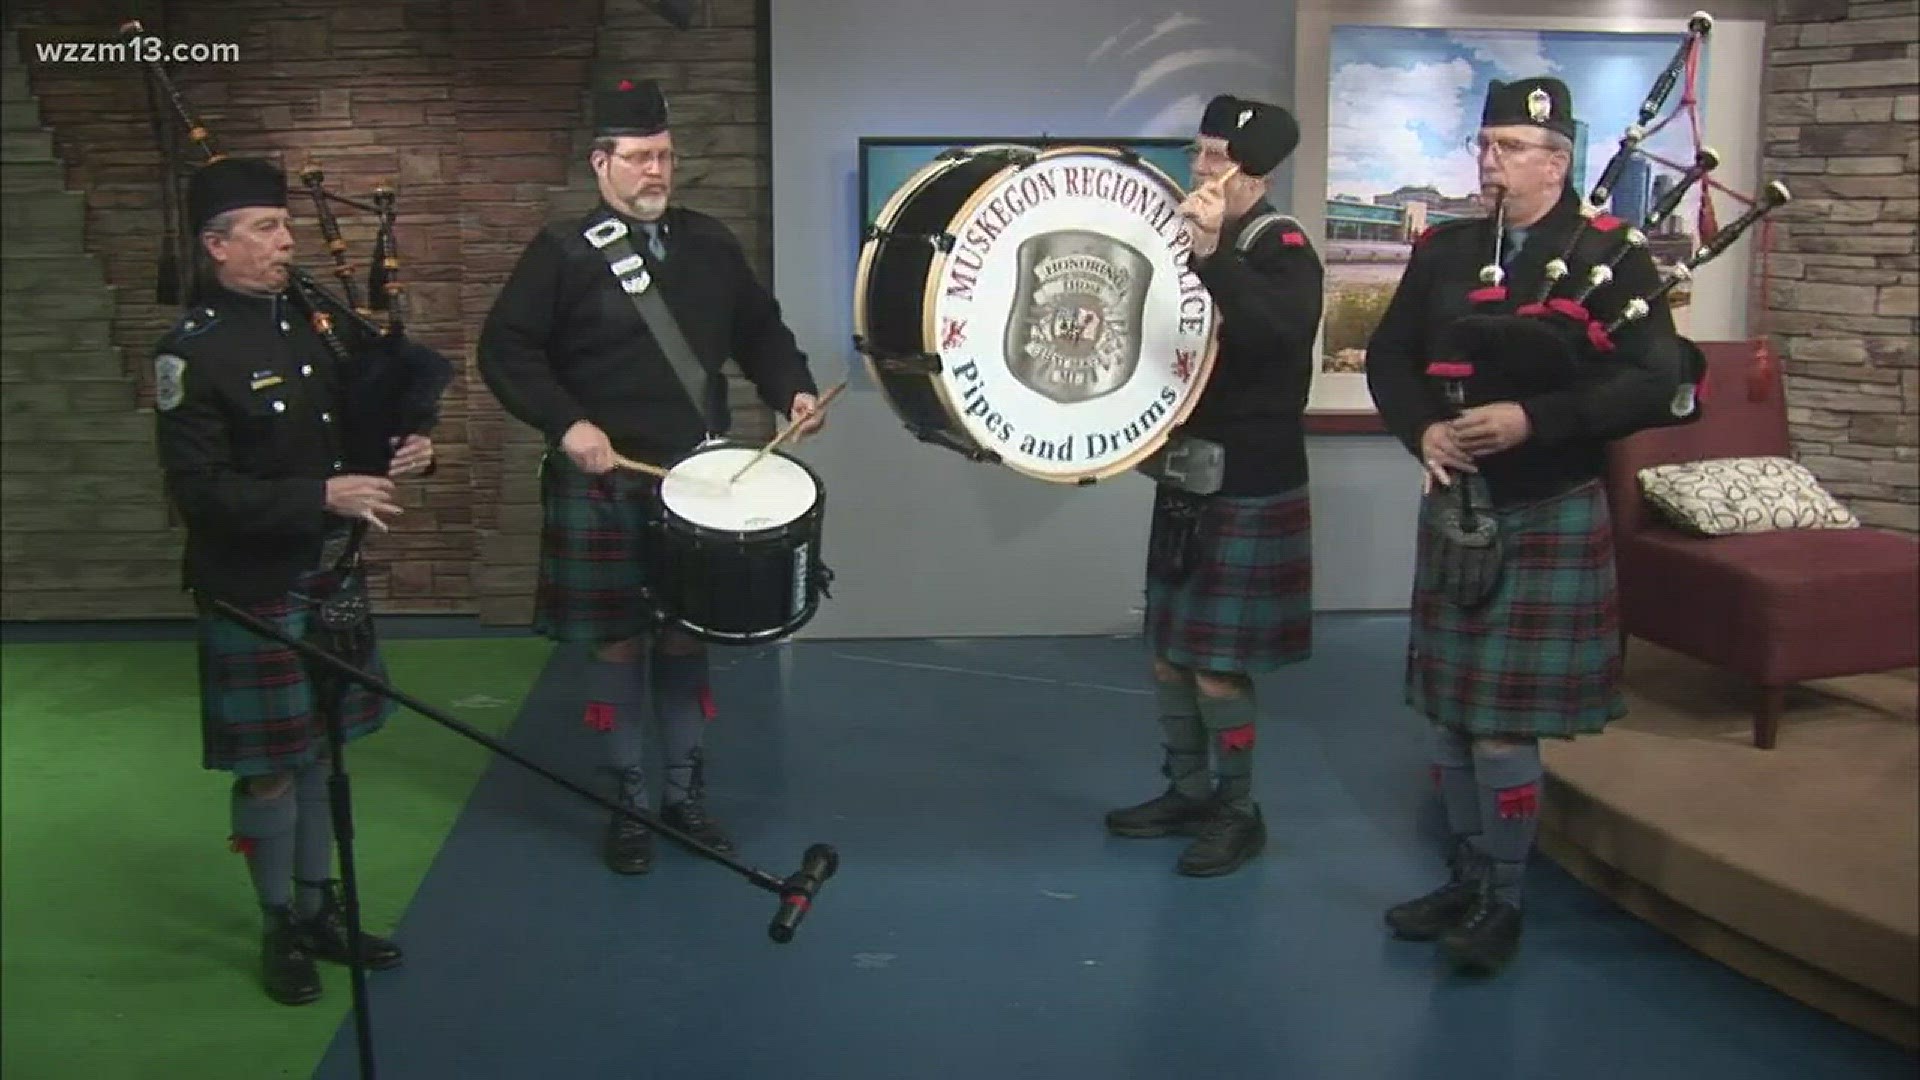 Muskegon Regional Police Pipes and Drums